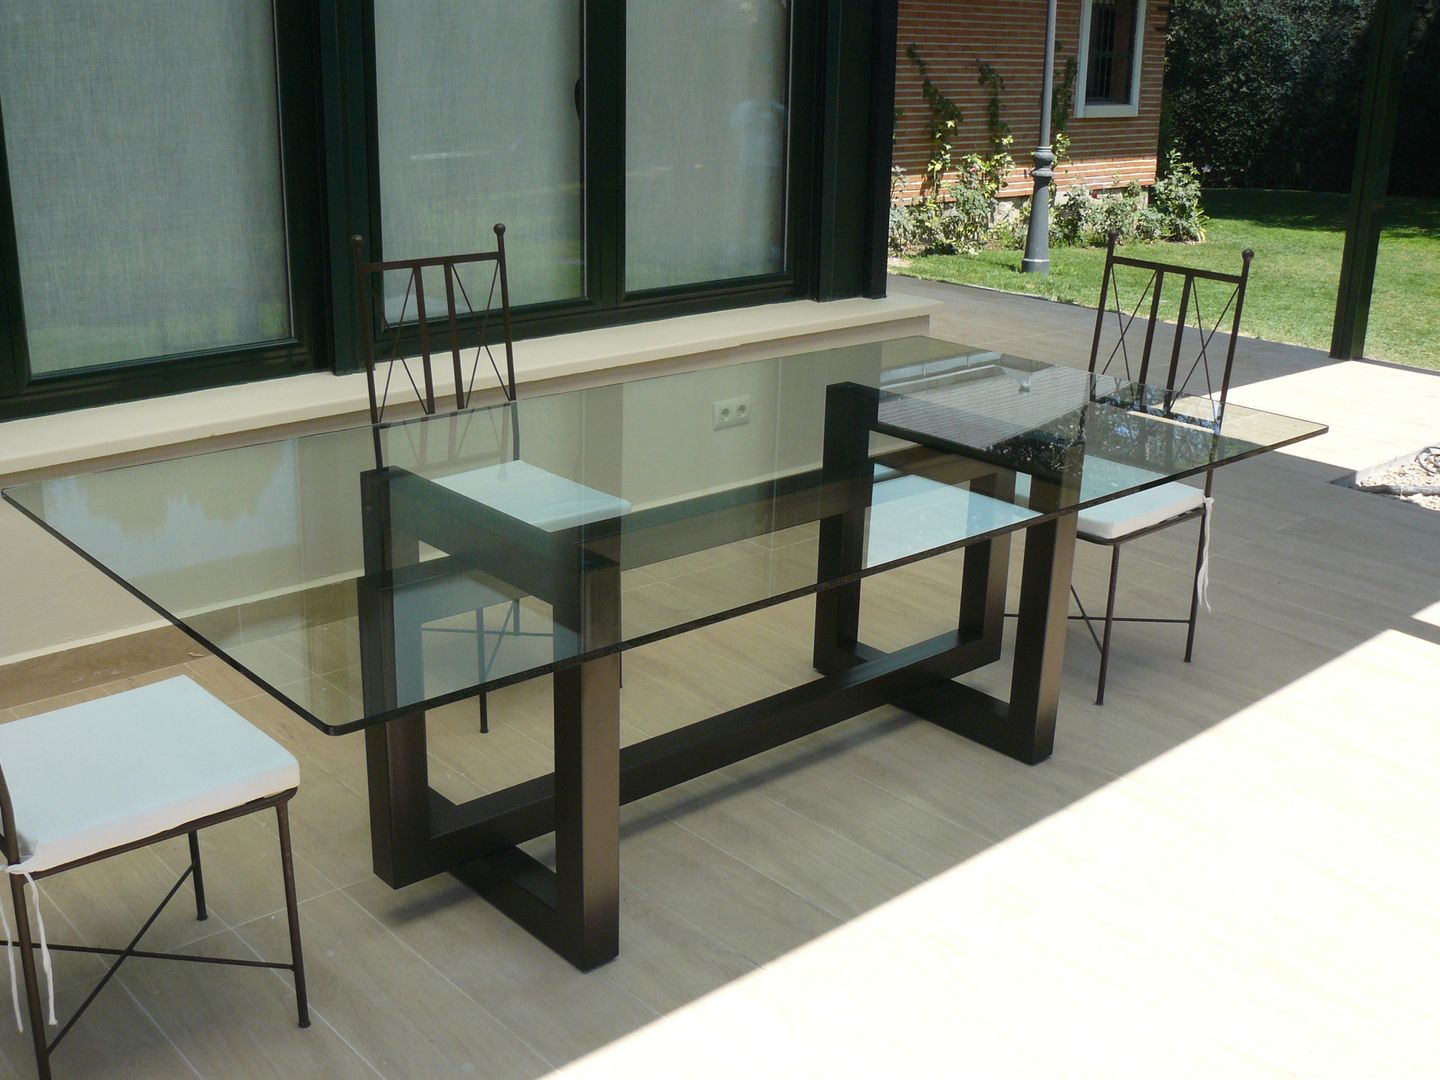 THASOS - Contemporary glass table homify Dining room dining table,glass dining table,glass table,rectangular table,steel table,metal table,modern table,custom made,Tables